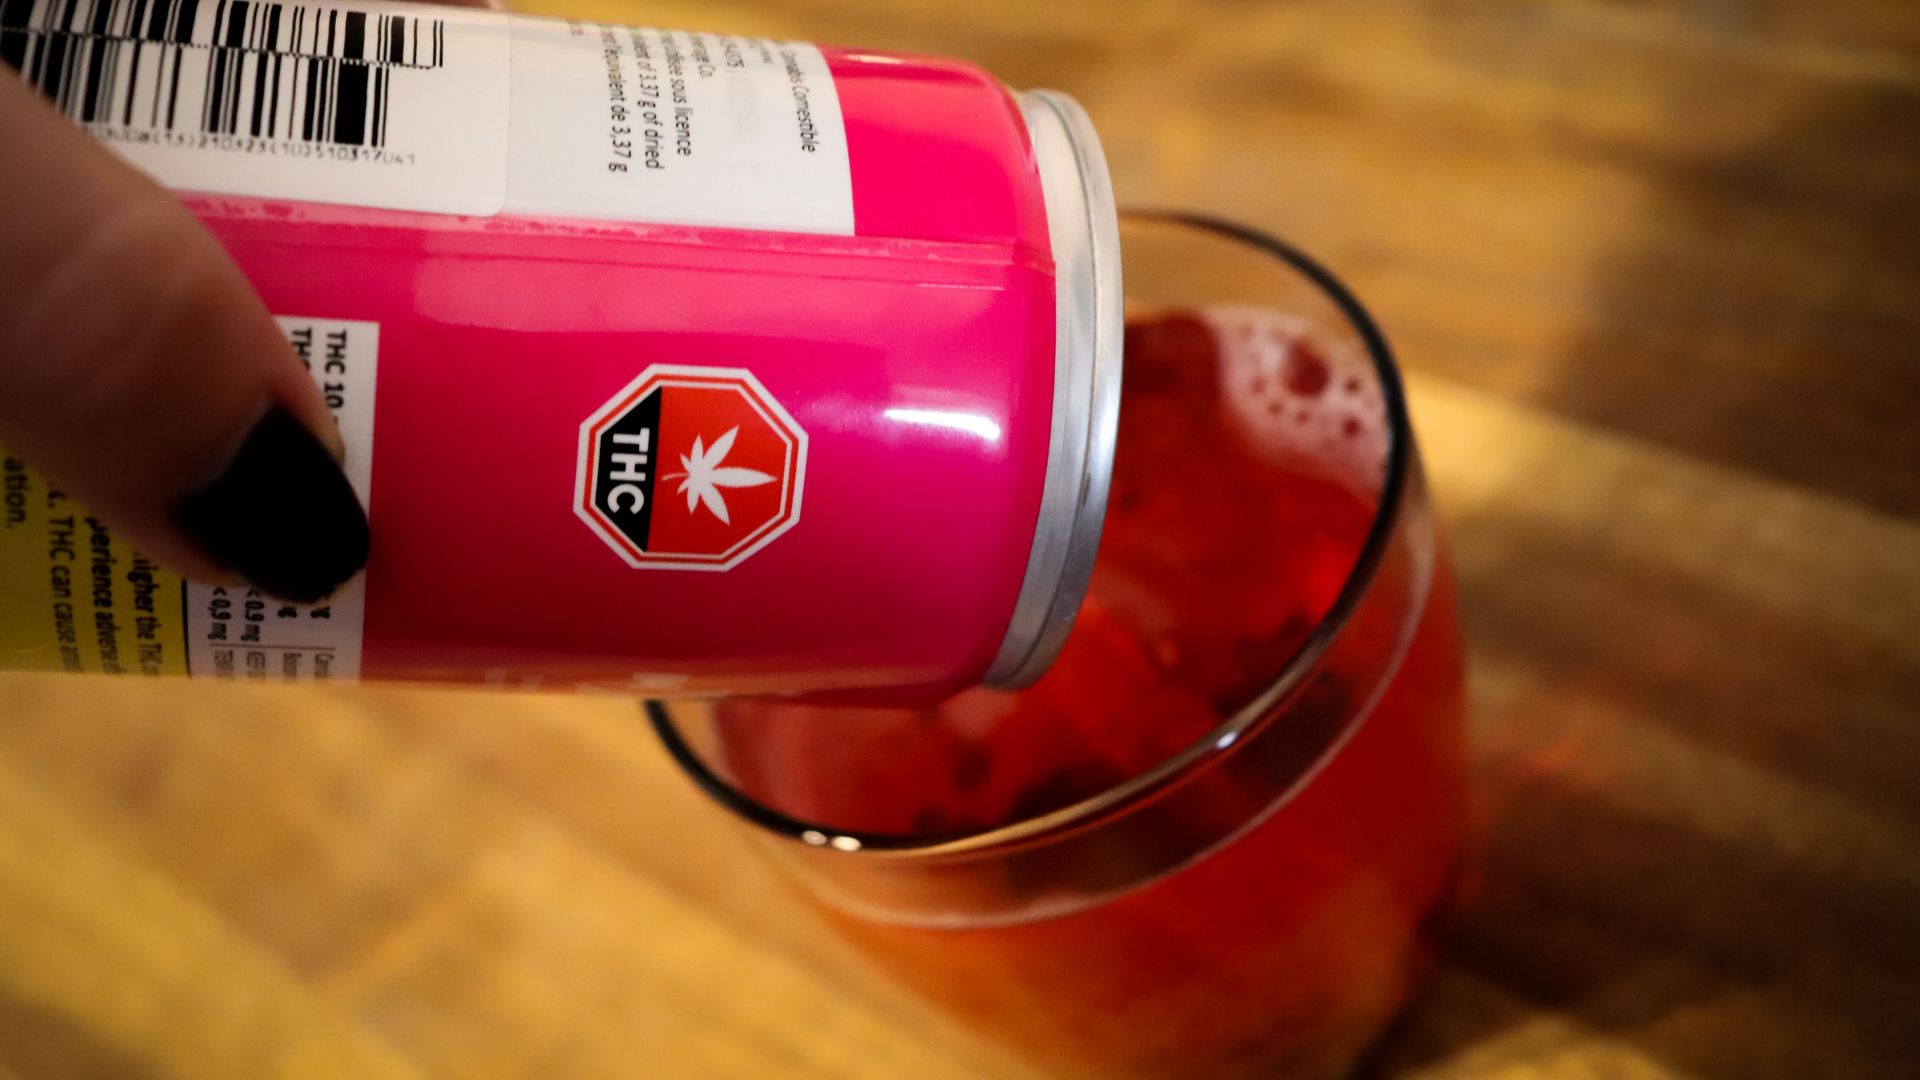 A THC beverage in a pink can is being poured into a glass.